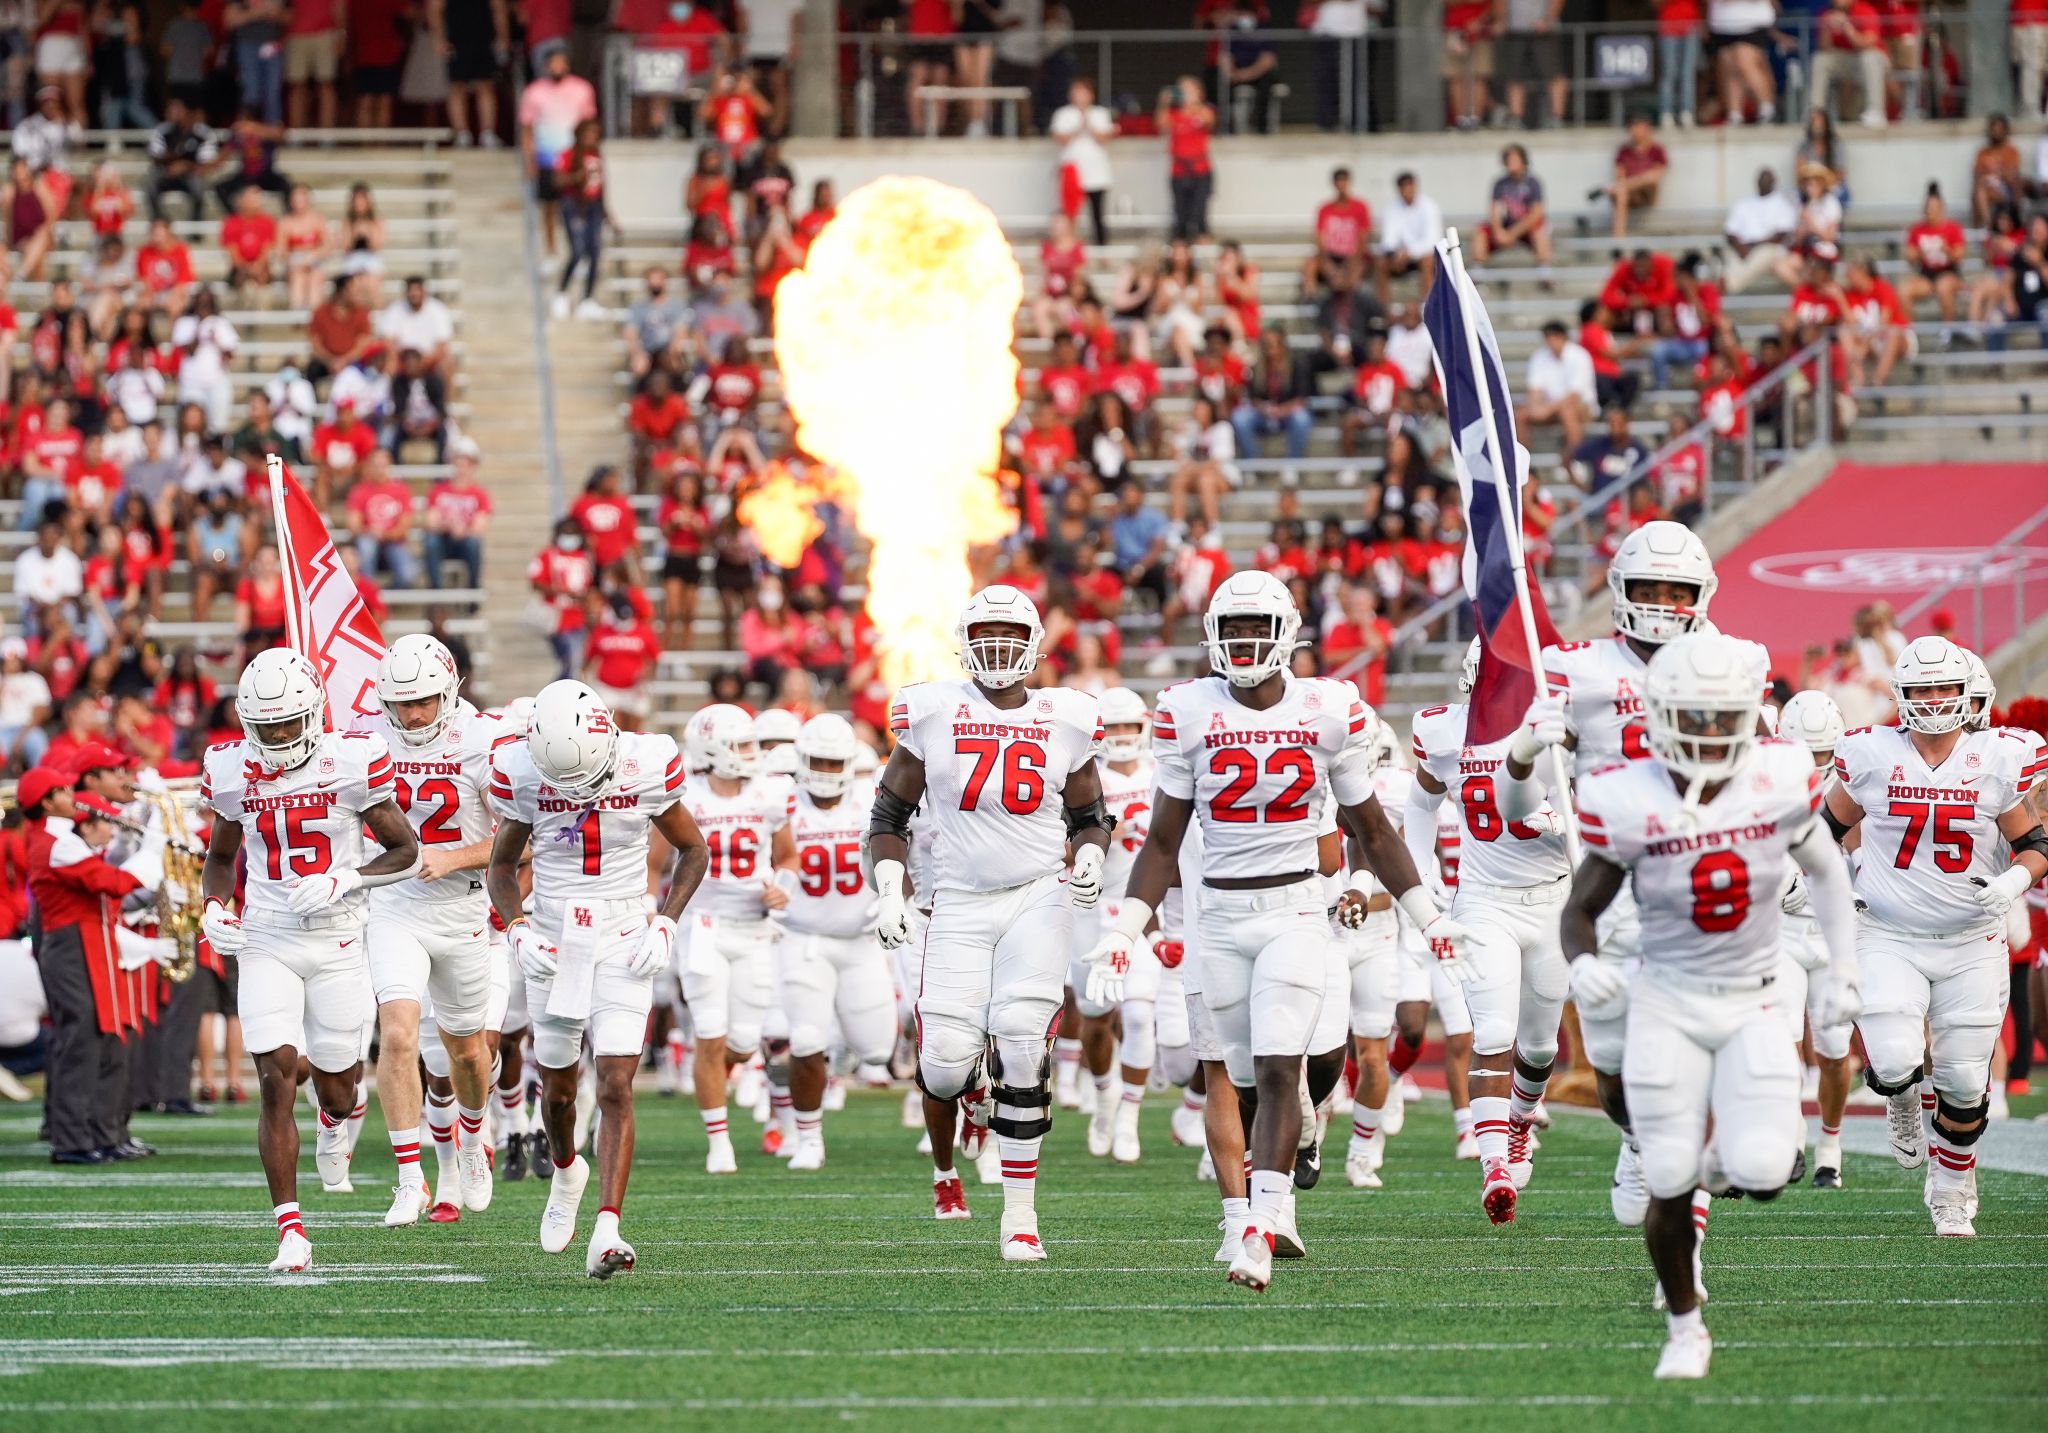 University of Houston to Big 12 Football looks for boost in attendance